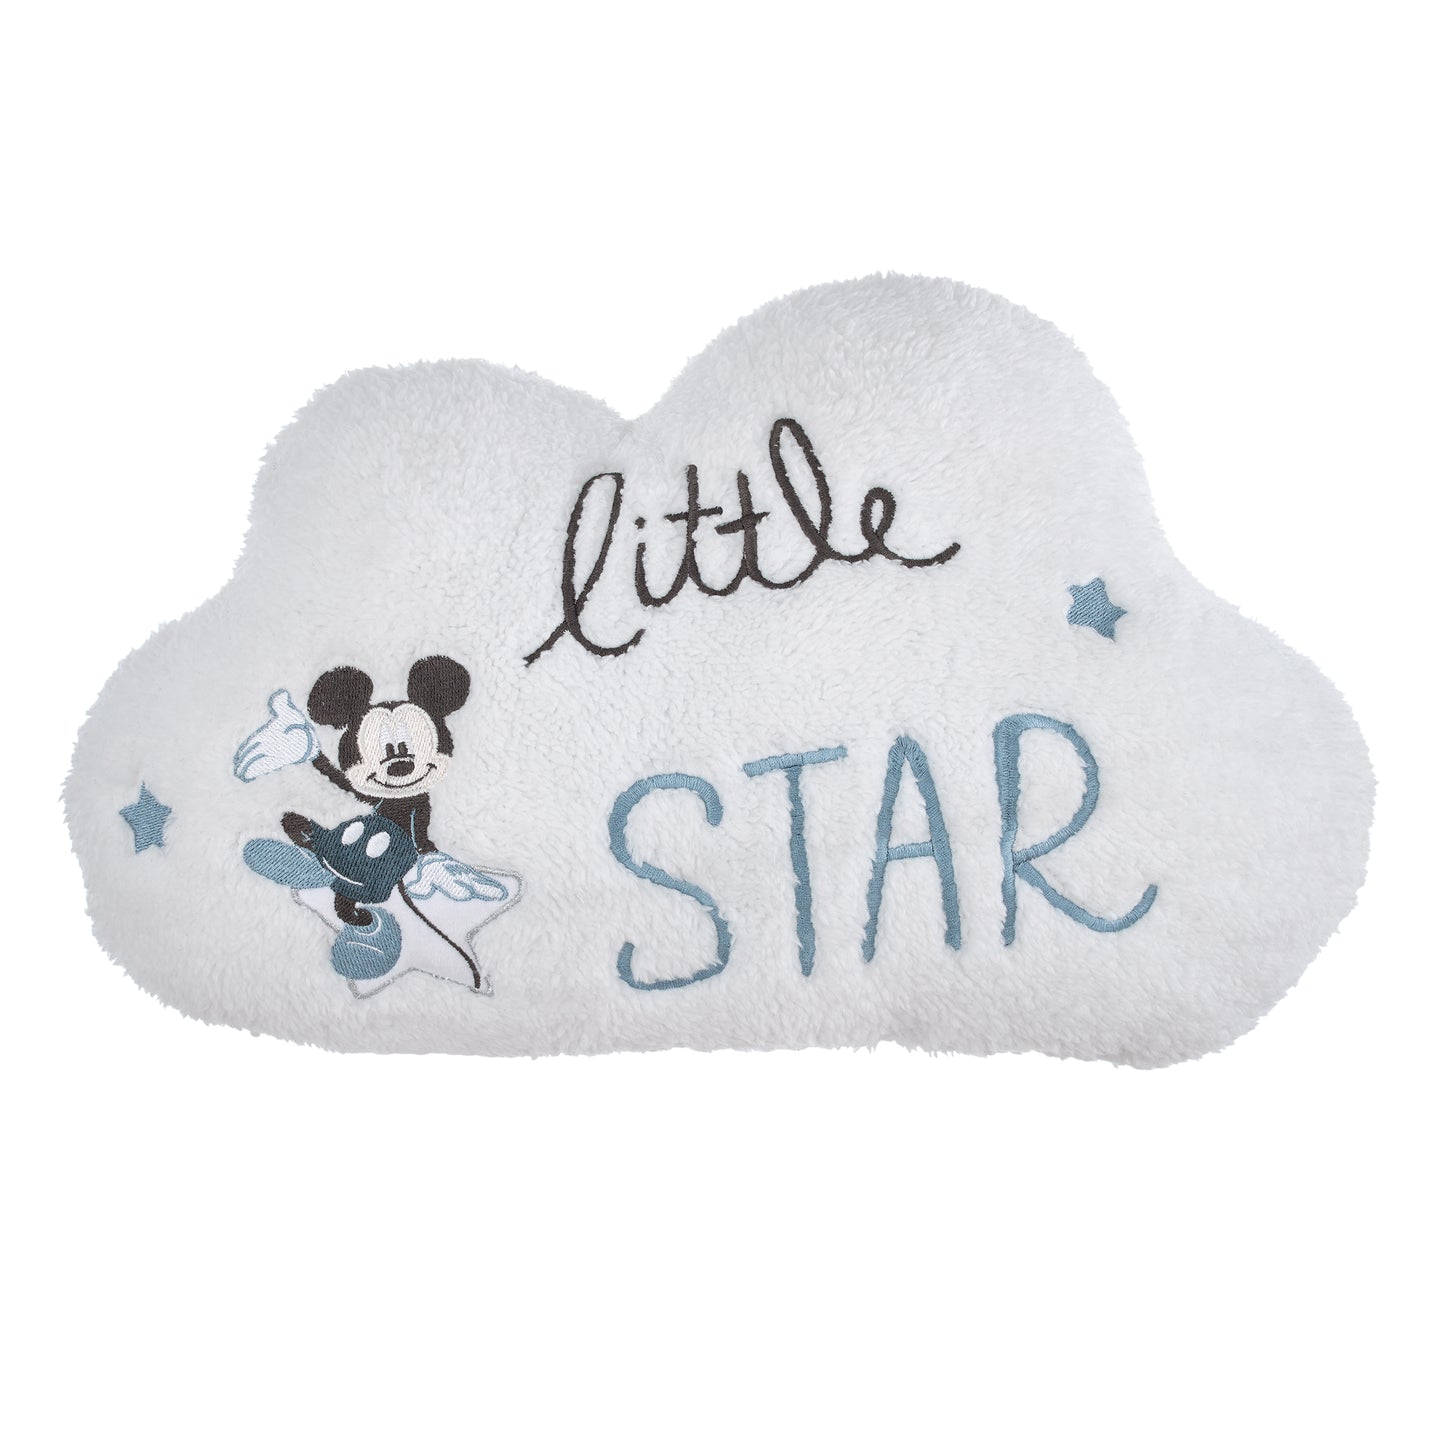 Disney Mickey Mouse White and Blue Sherpa Embroidered Little Star Cloud Shaped Decorative Throw Pillow